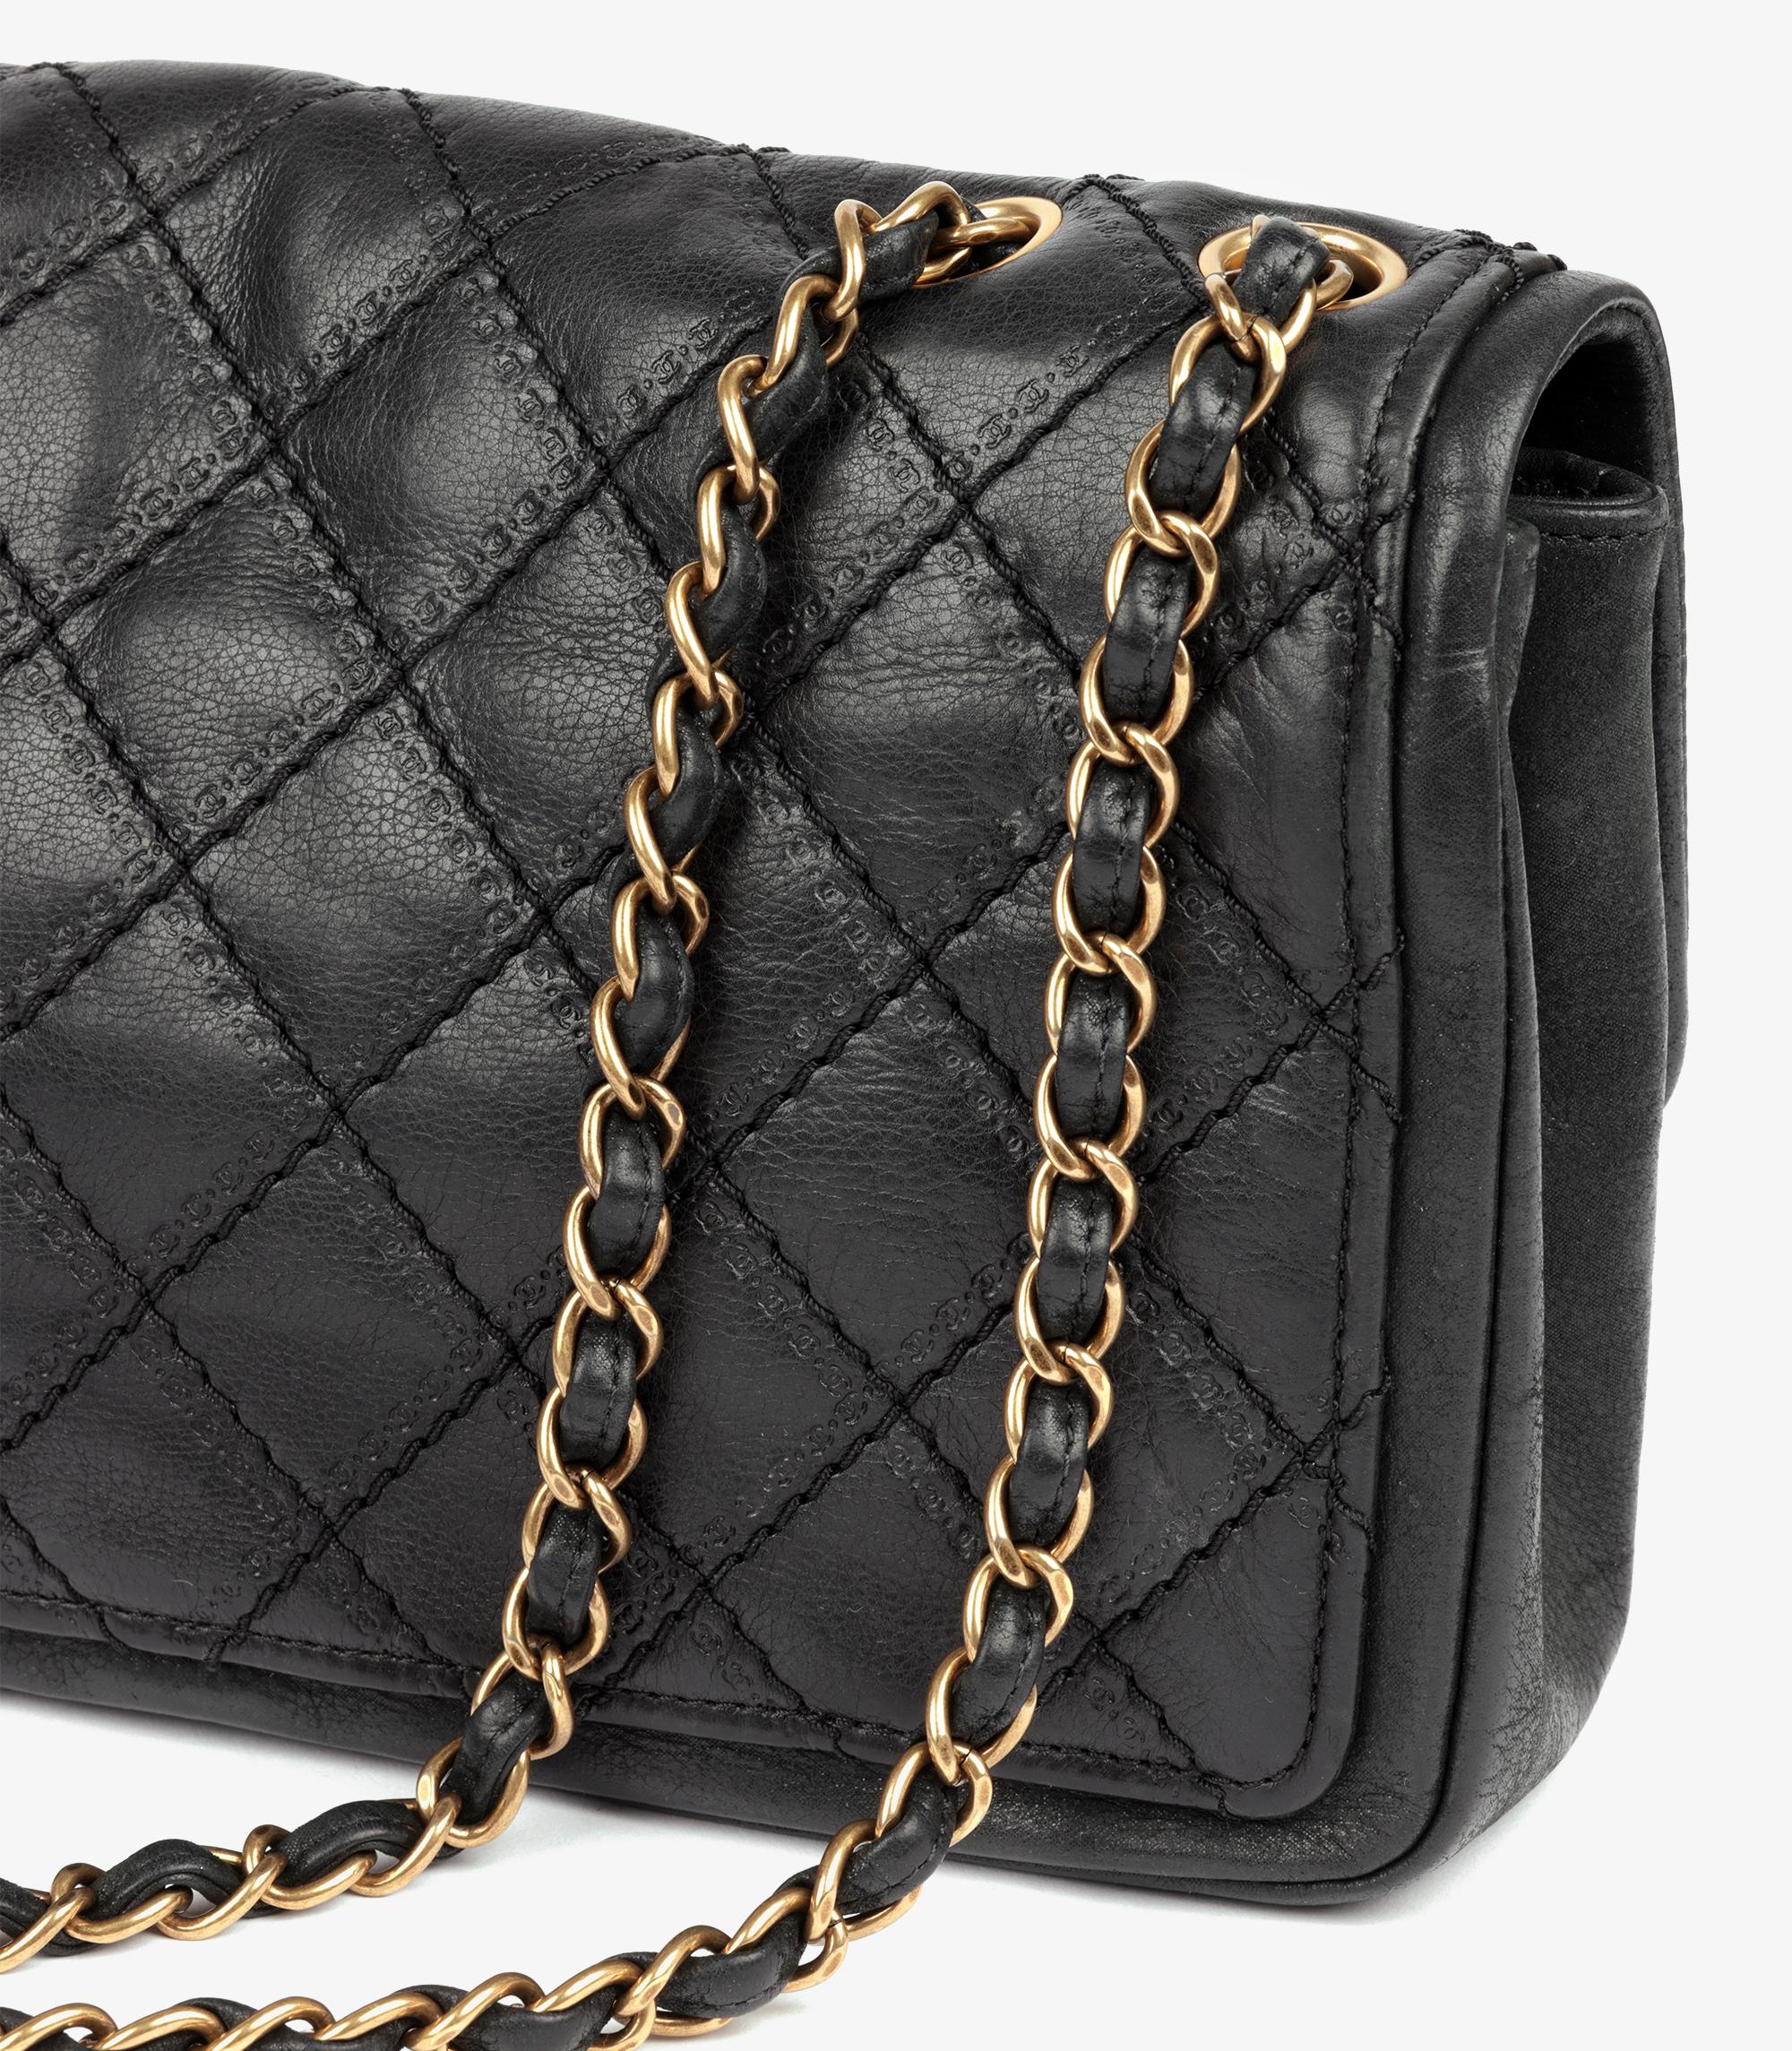 Chanel Black Quilted Iridescent Calfskin Leather Sheriff Star Single Flag Bag For Sale 1